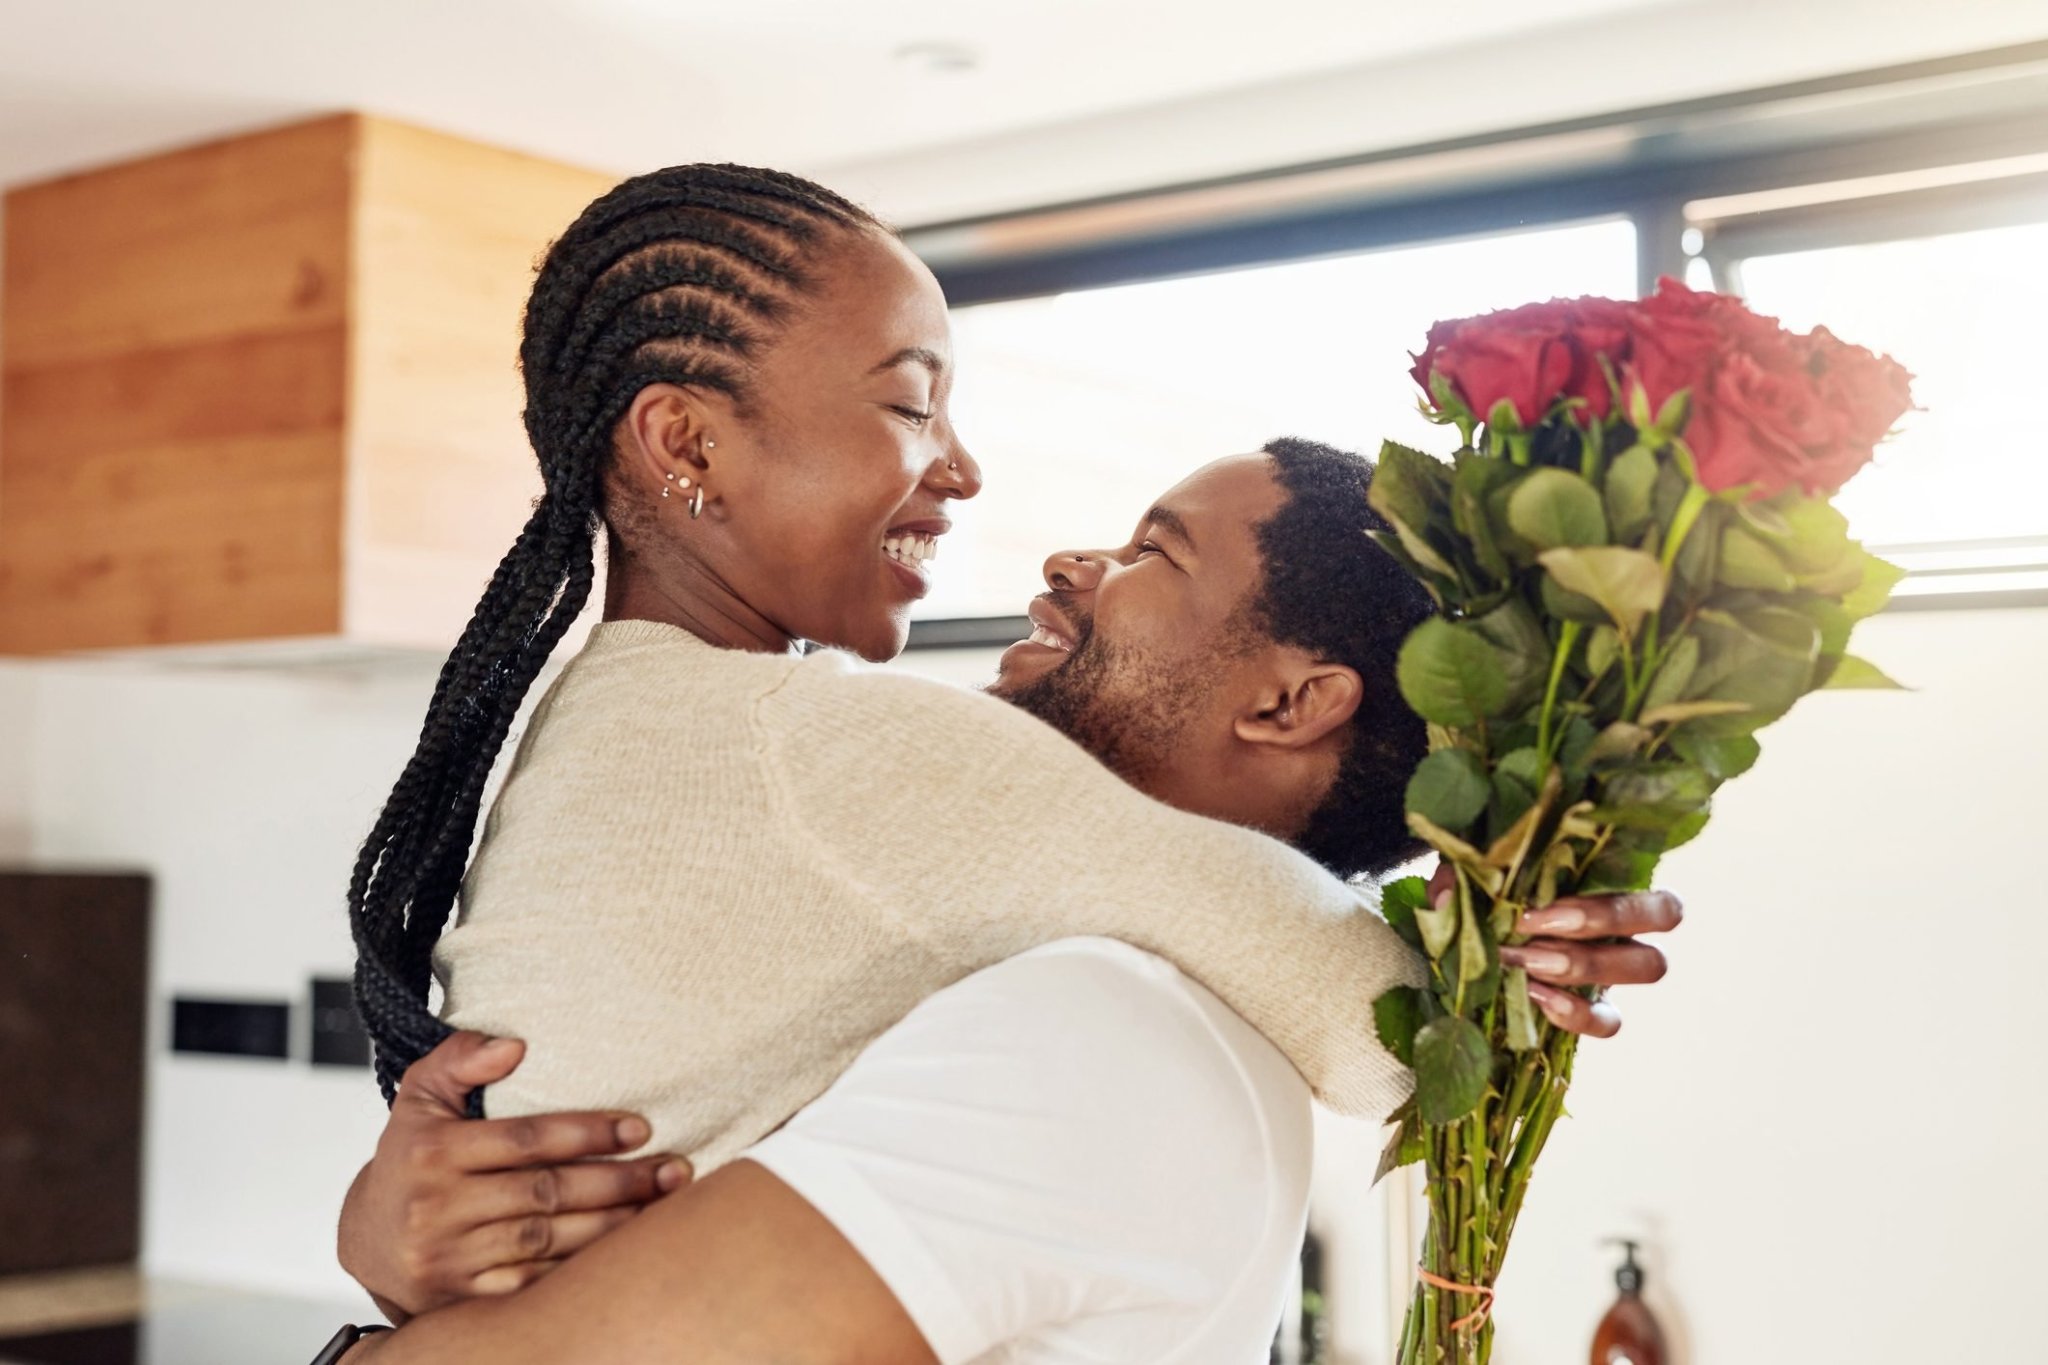 14 Ways to Be Romantic and Sweep Your Partner Off Their Feet